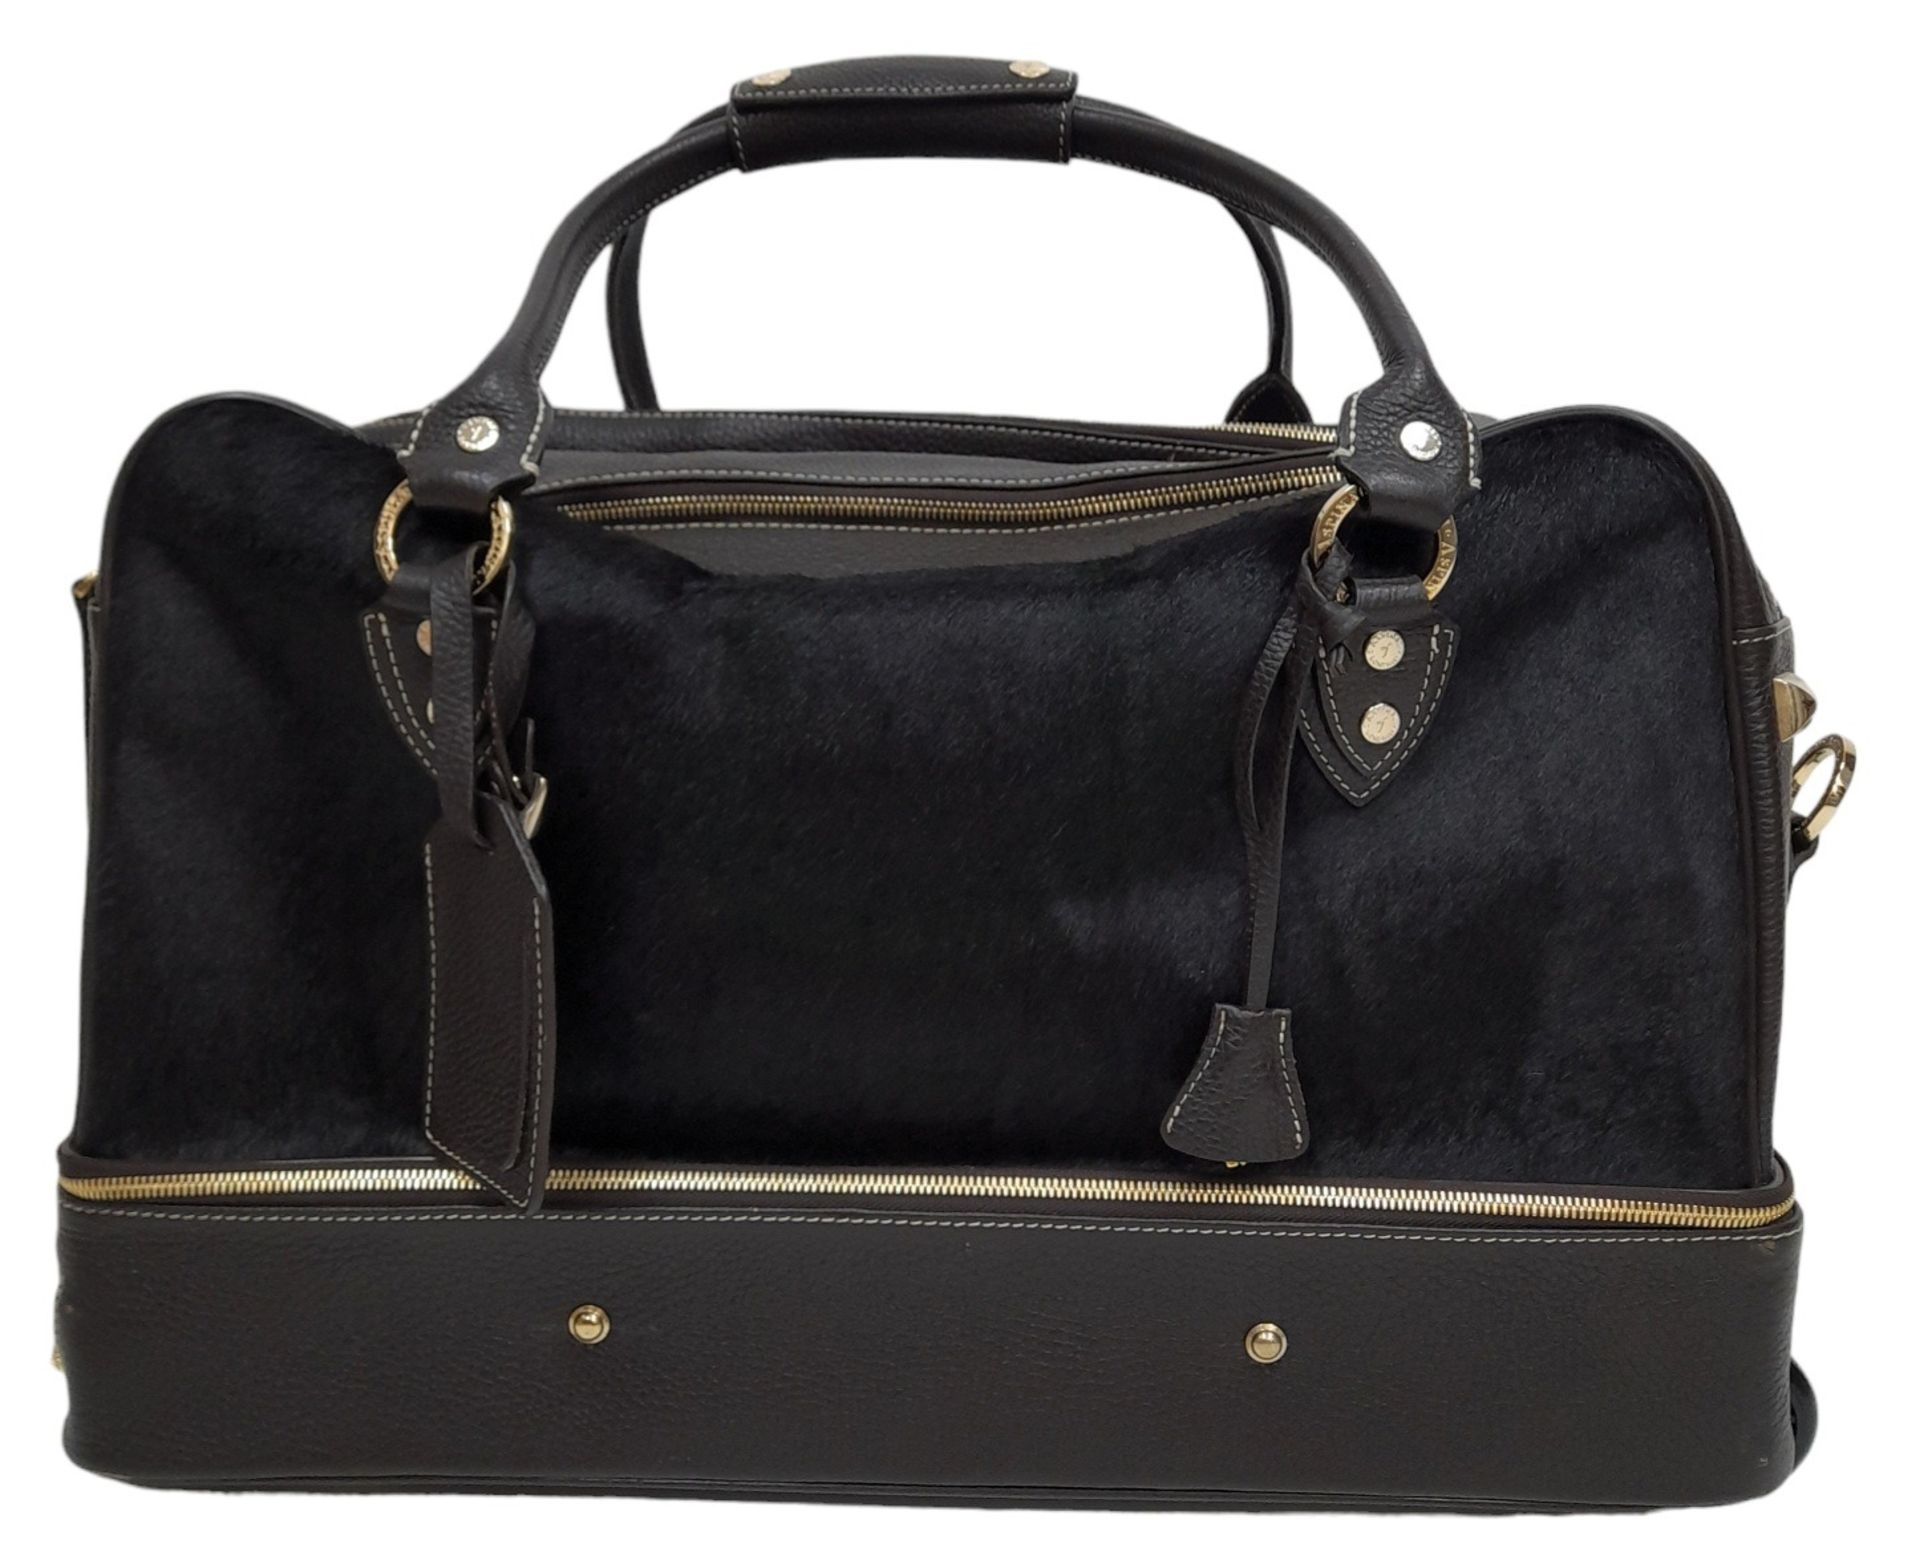 An Aspinal Brown Portofino Convertible Luggage Bag. Leather and pony fur exterior with gold-toned - Image 14 of 16